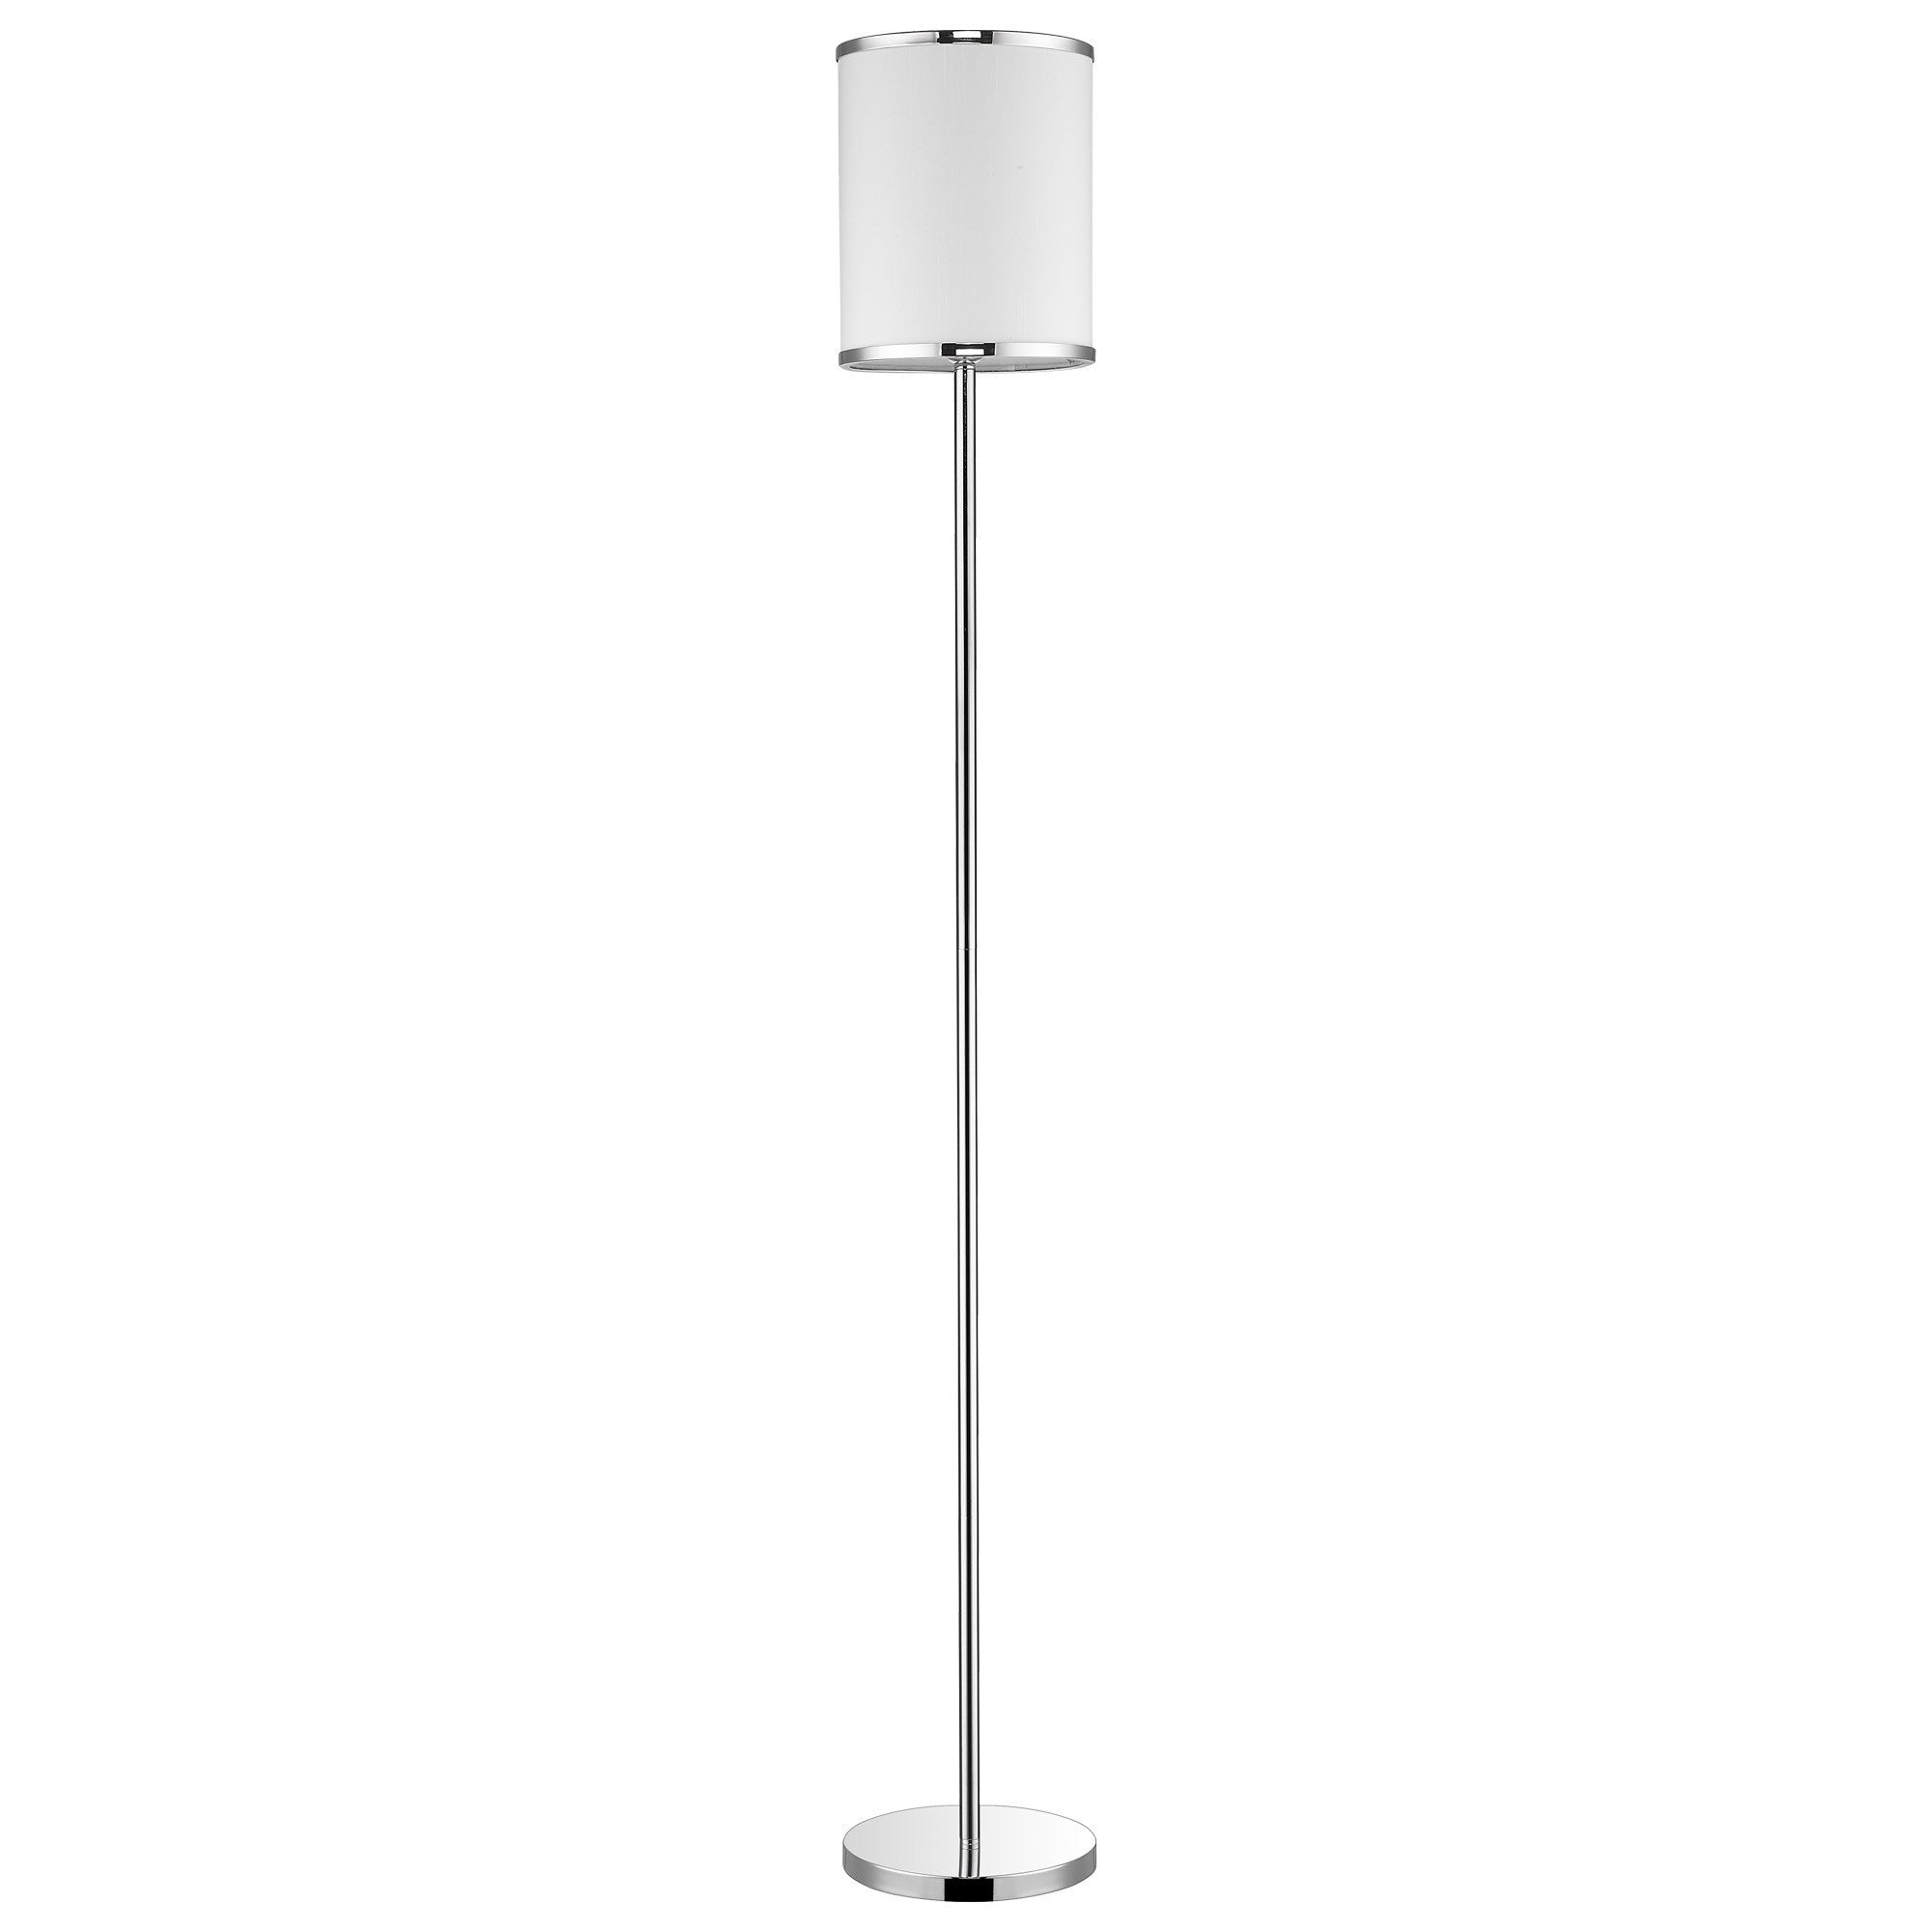 65" Chrome Traditional Shaped Floor Lamp With White Drum Shade